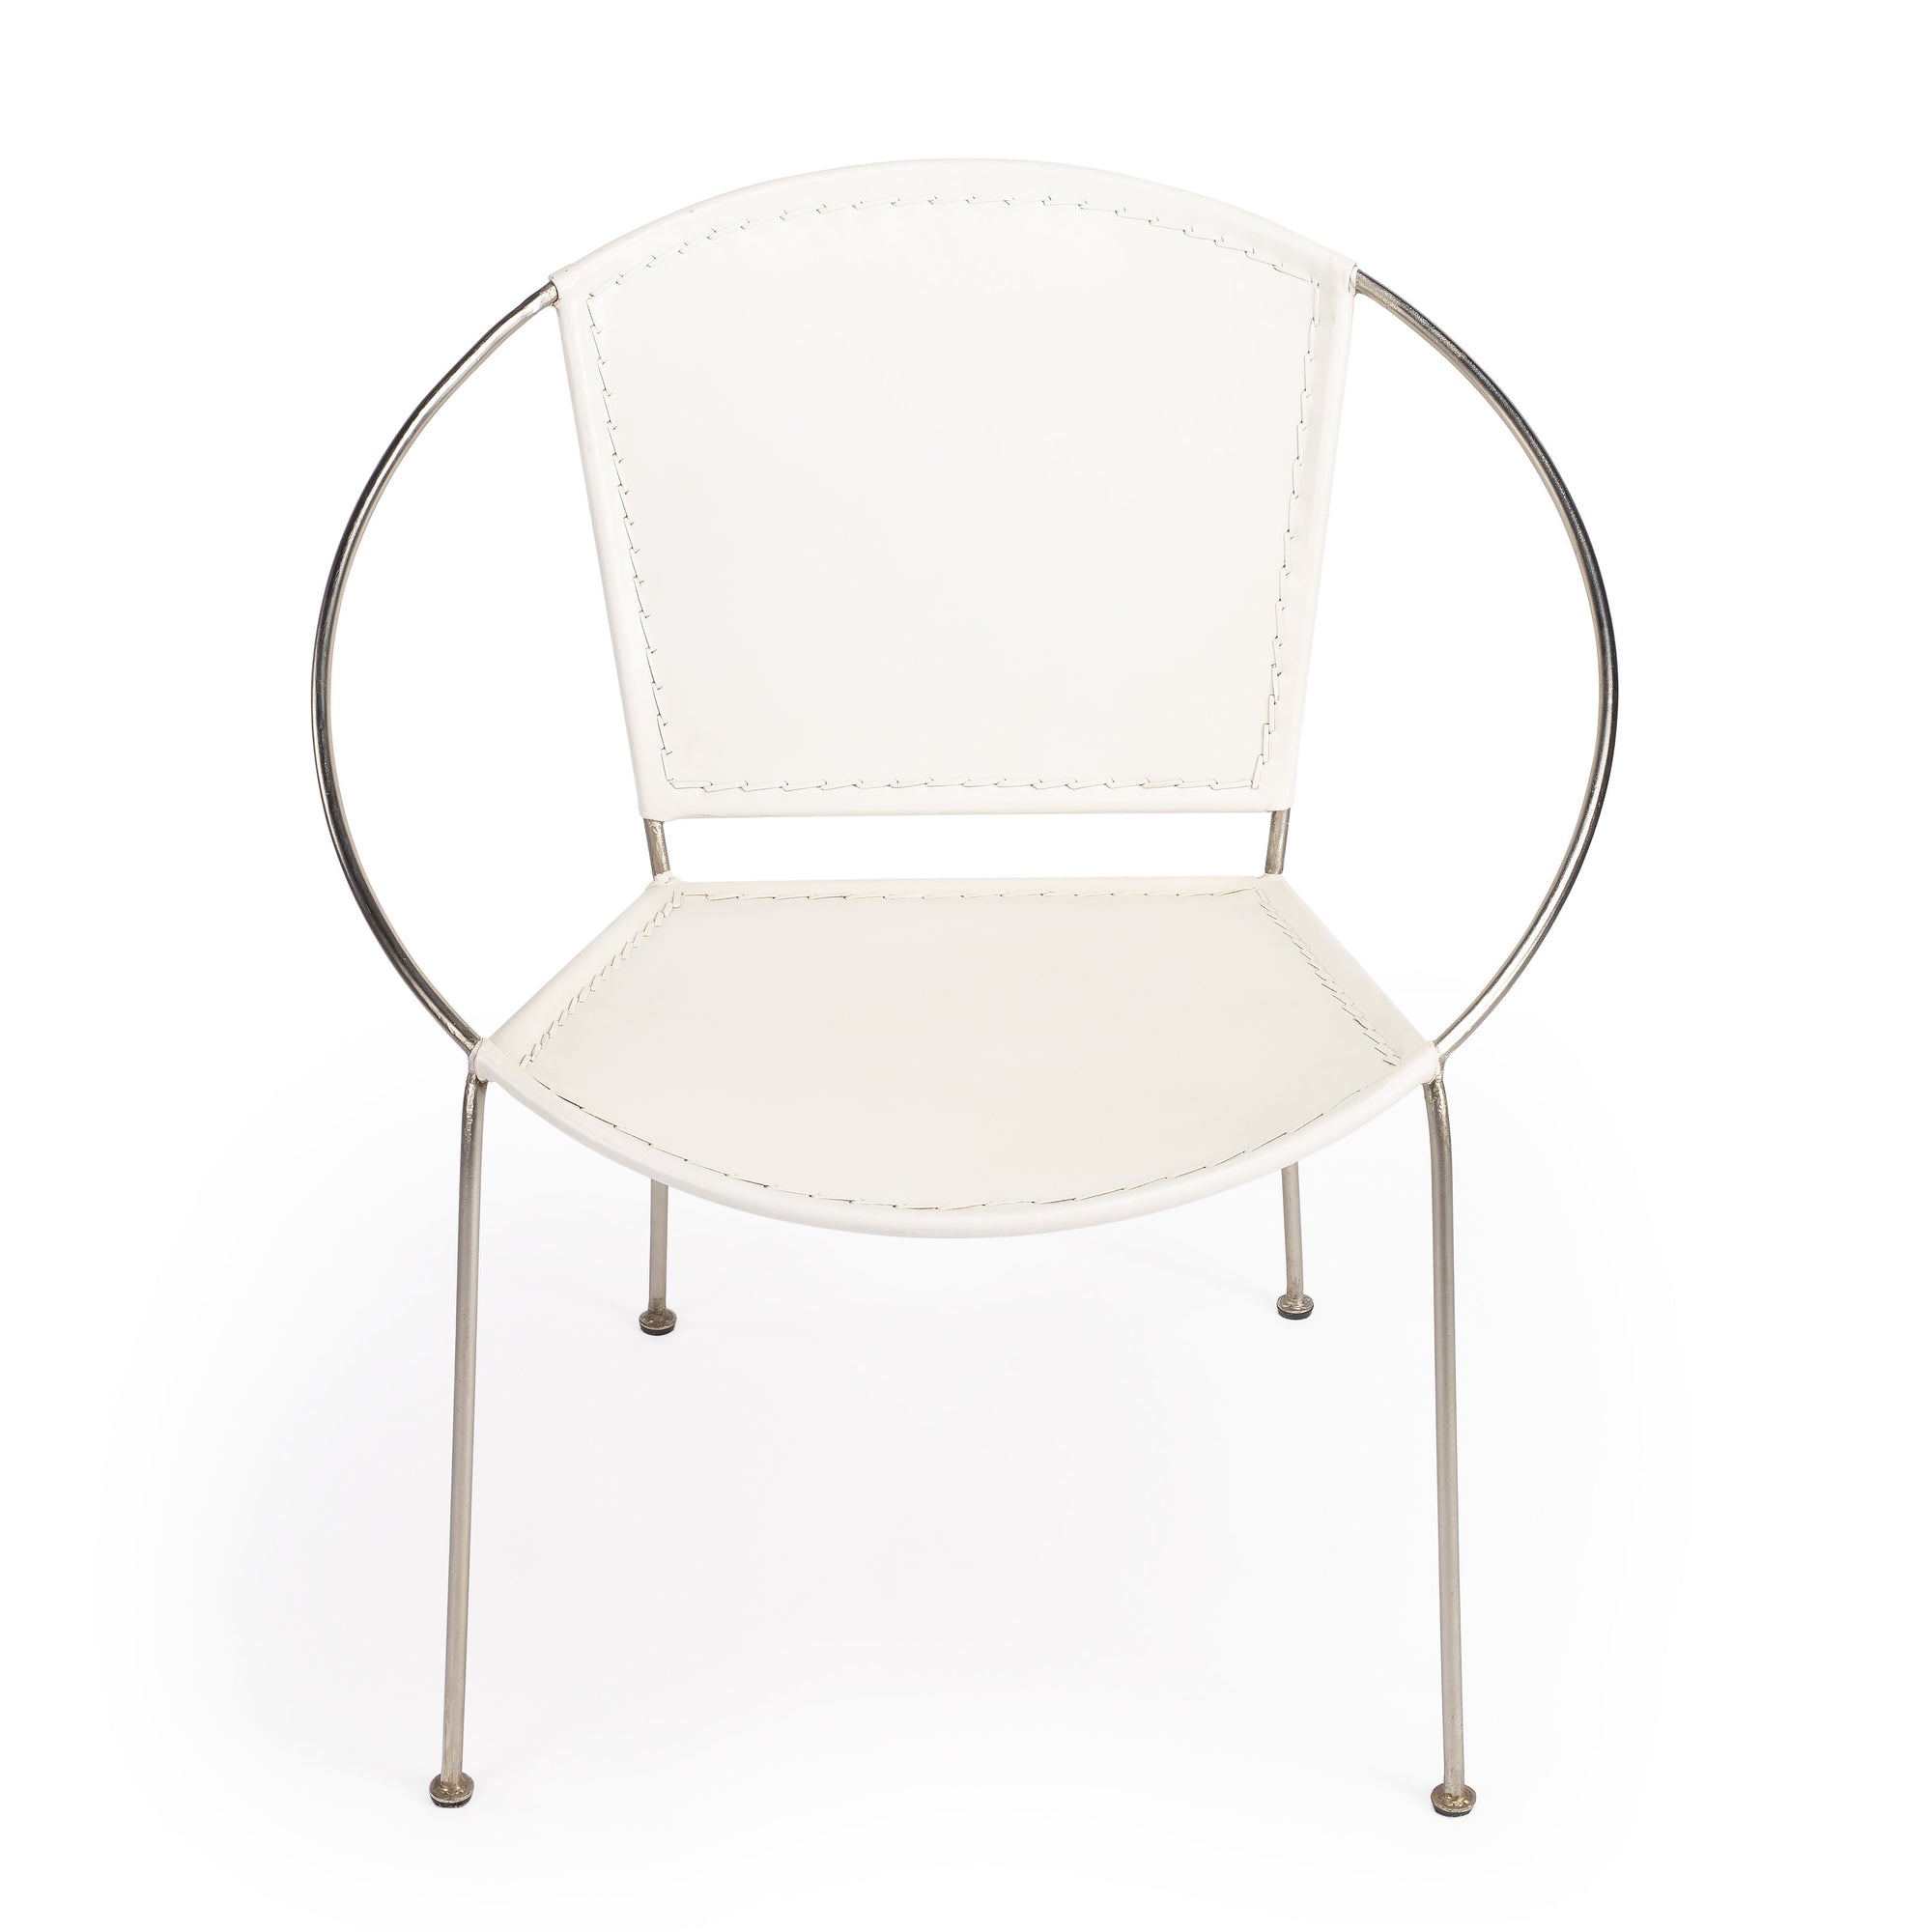 Butler Specialty Stylish White Leather Oval Accent Chair Accent Chairs Butler Specialty